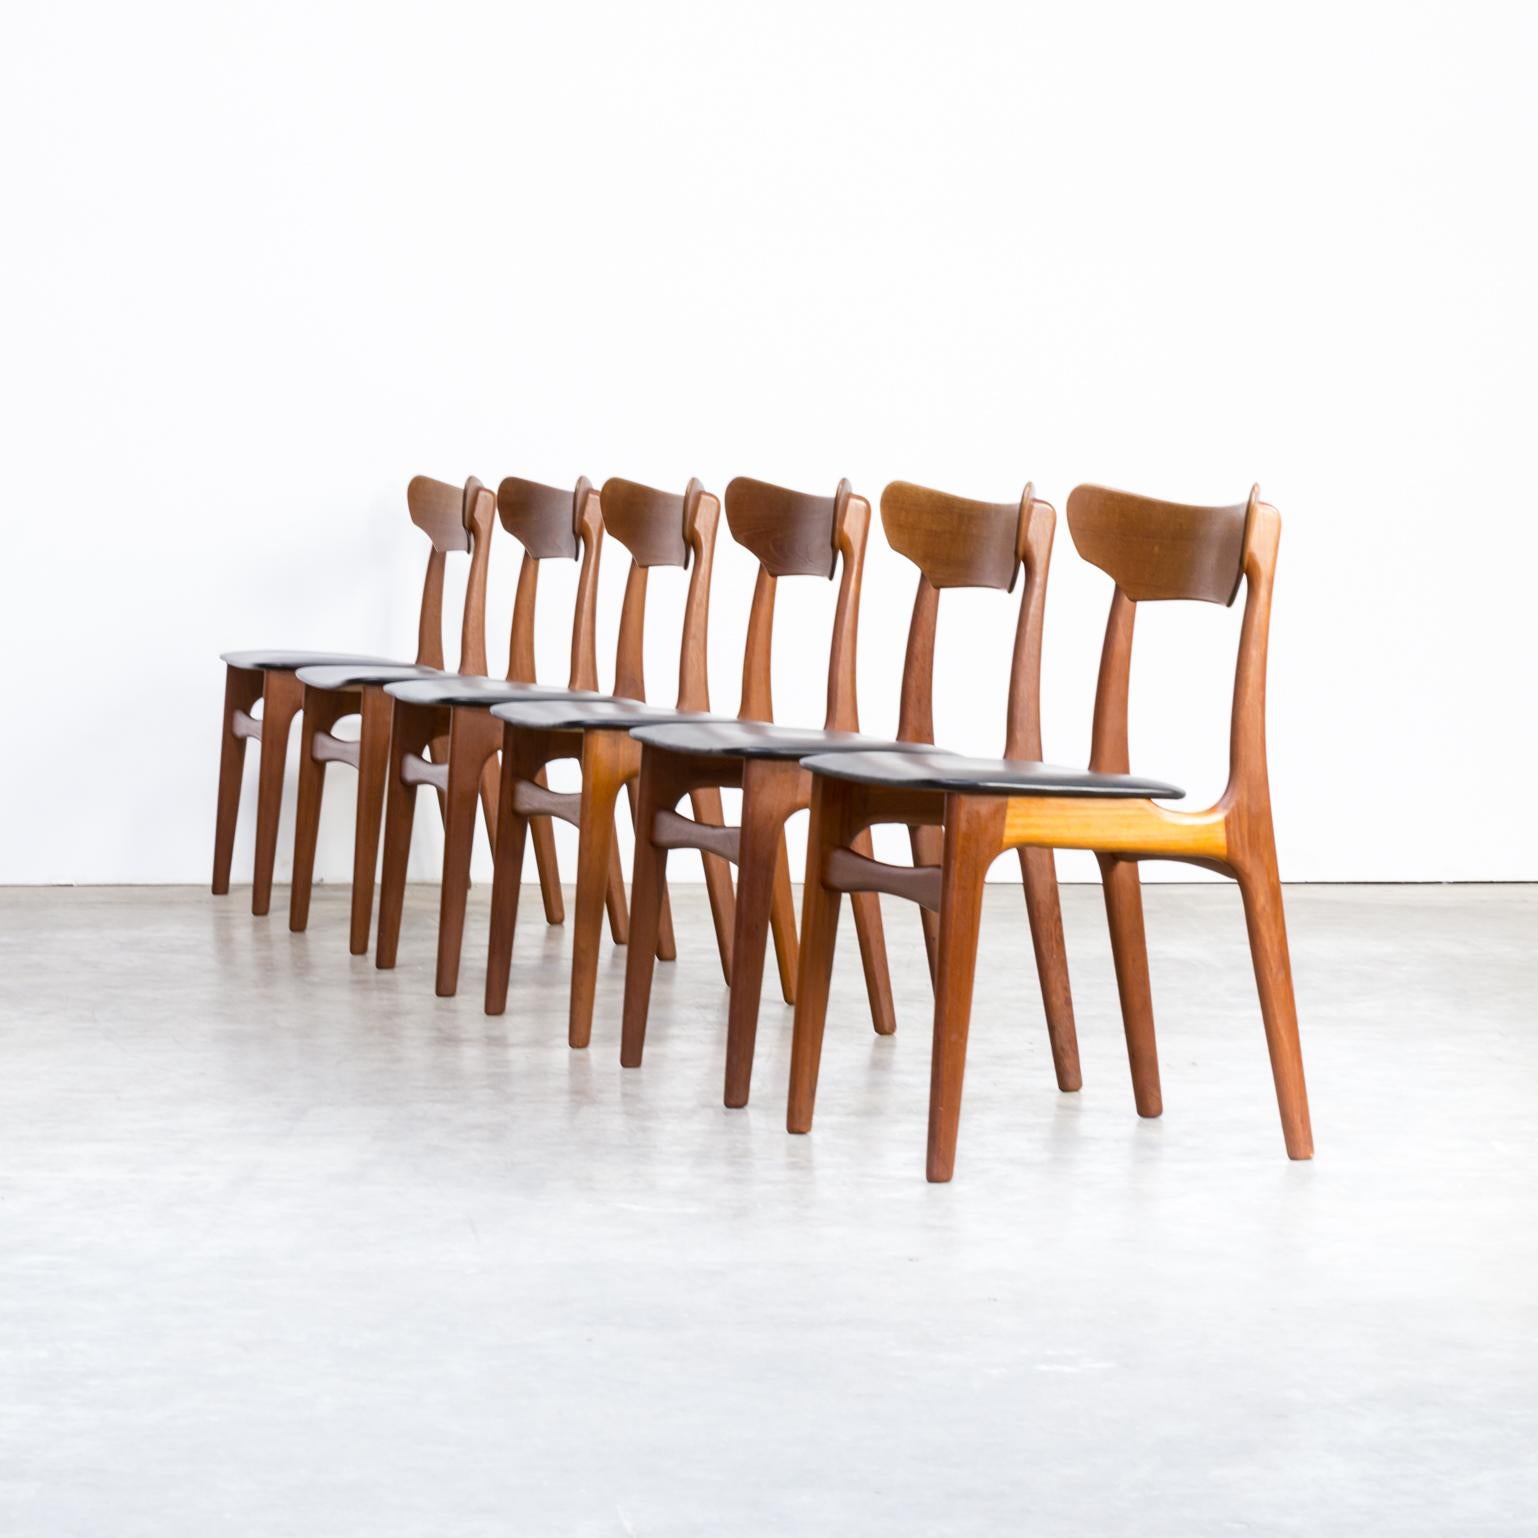 1960s Schionning and Elgaard teak dining chair for Randers set of 6. Good condition, consistent with age and use.